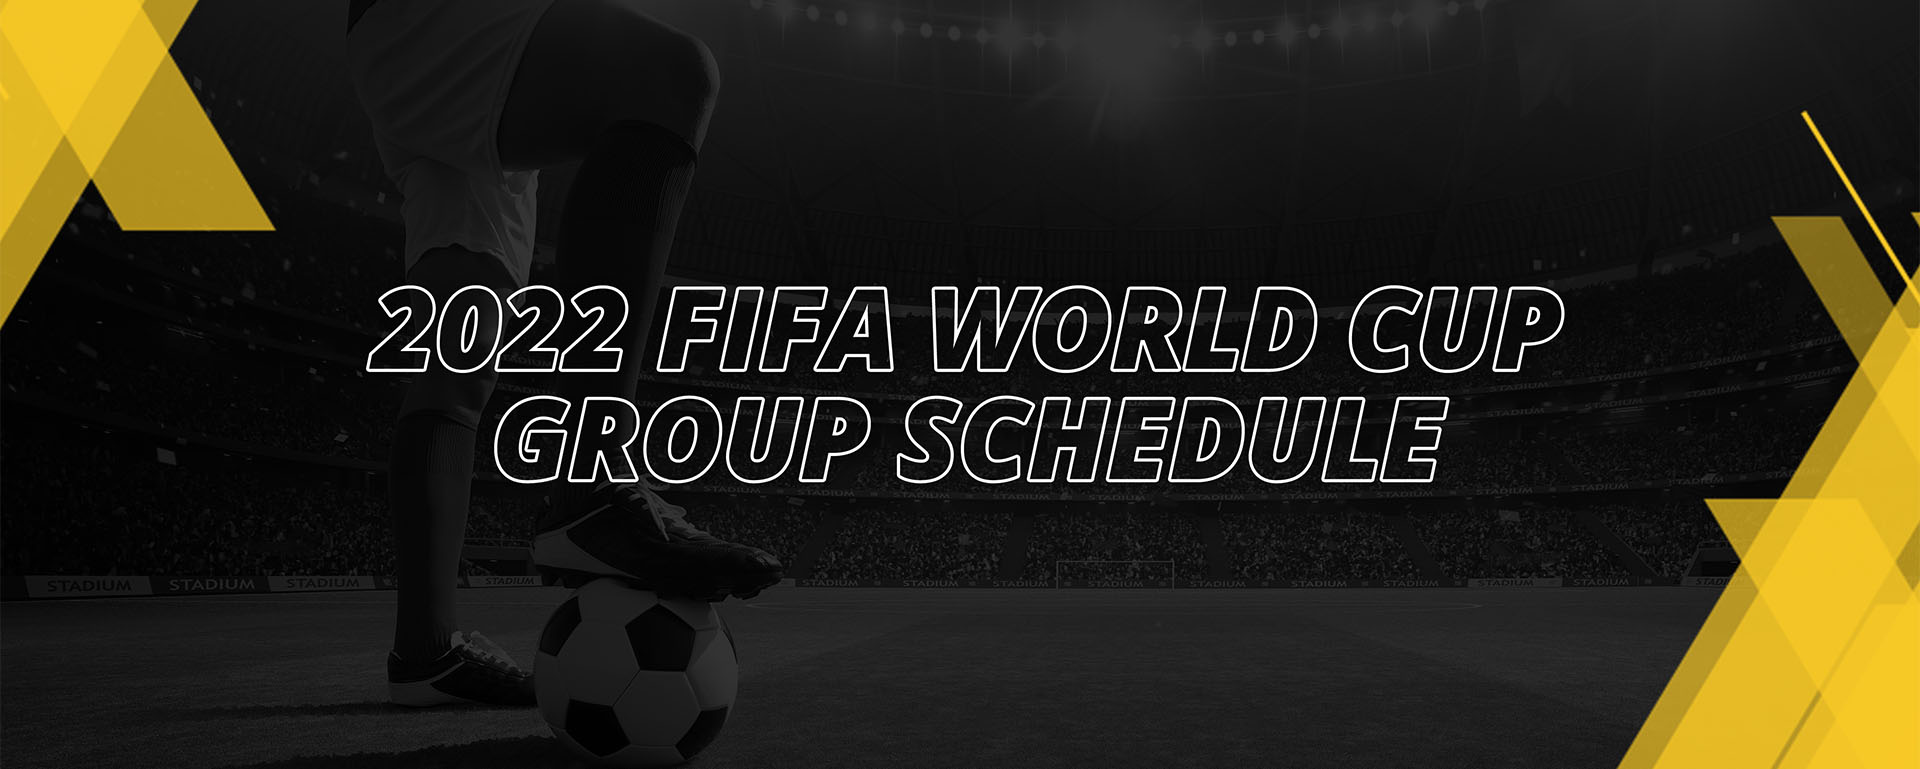 2022 FIFA WORLD CUP GROUP SCHEDULE